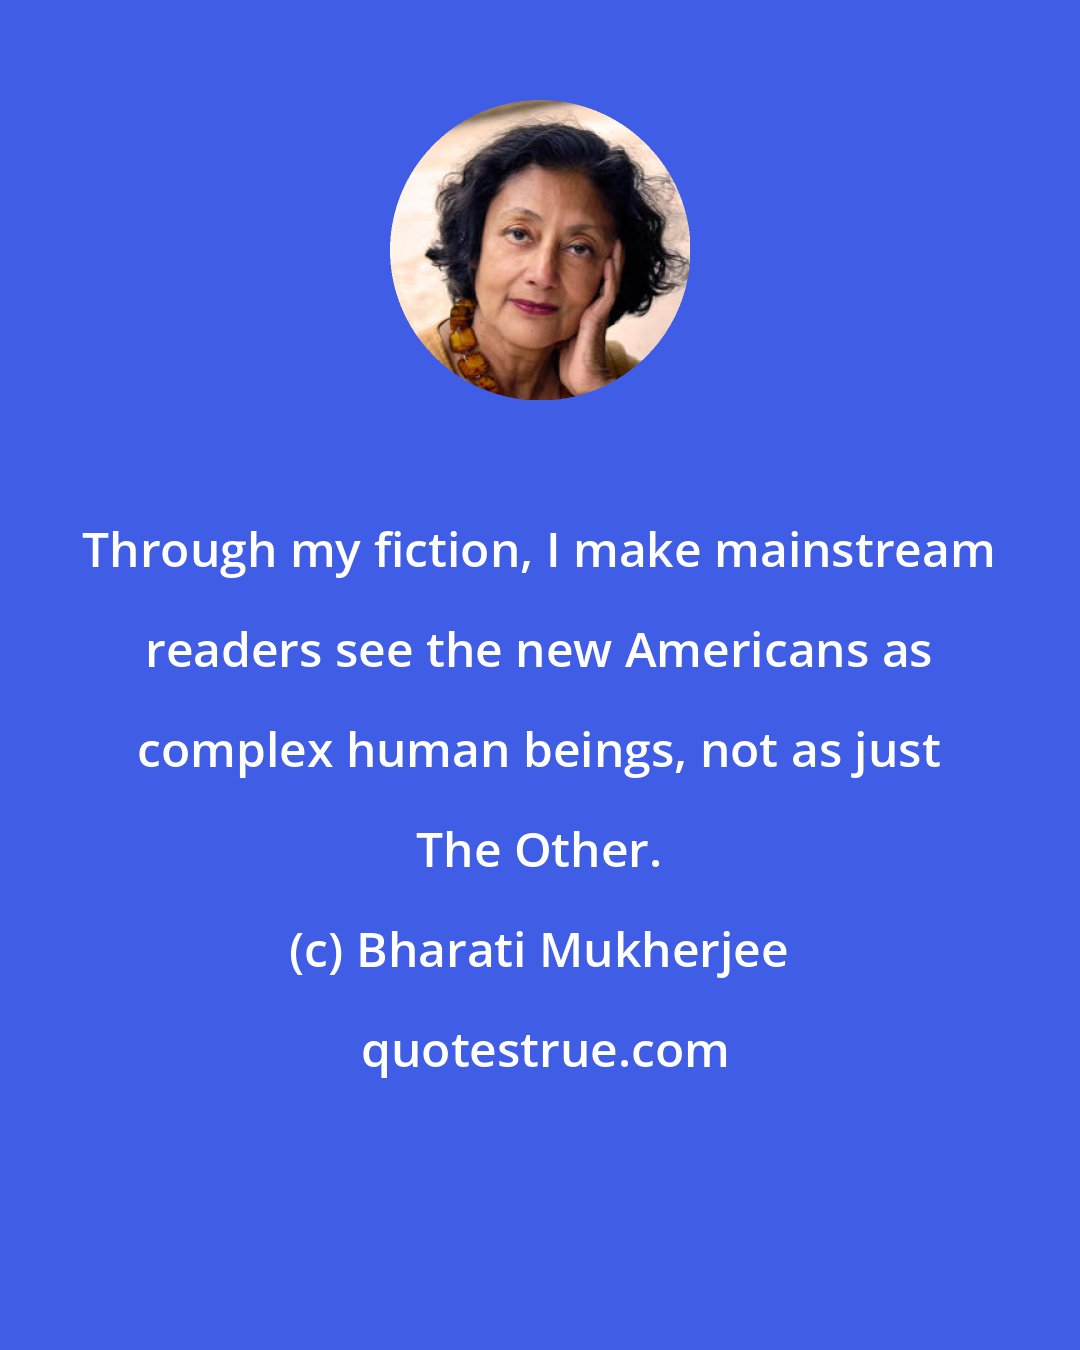 Bharati Mukherjee: Through my fiction, I make mainstream readers see the new Americans as complex human beings, not as just The Other.